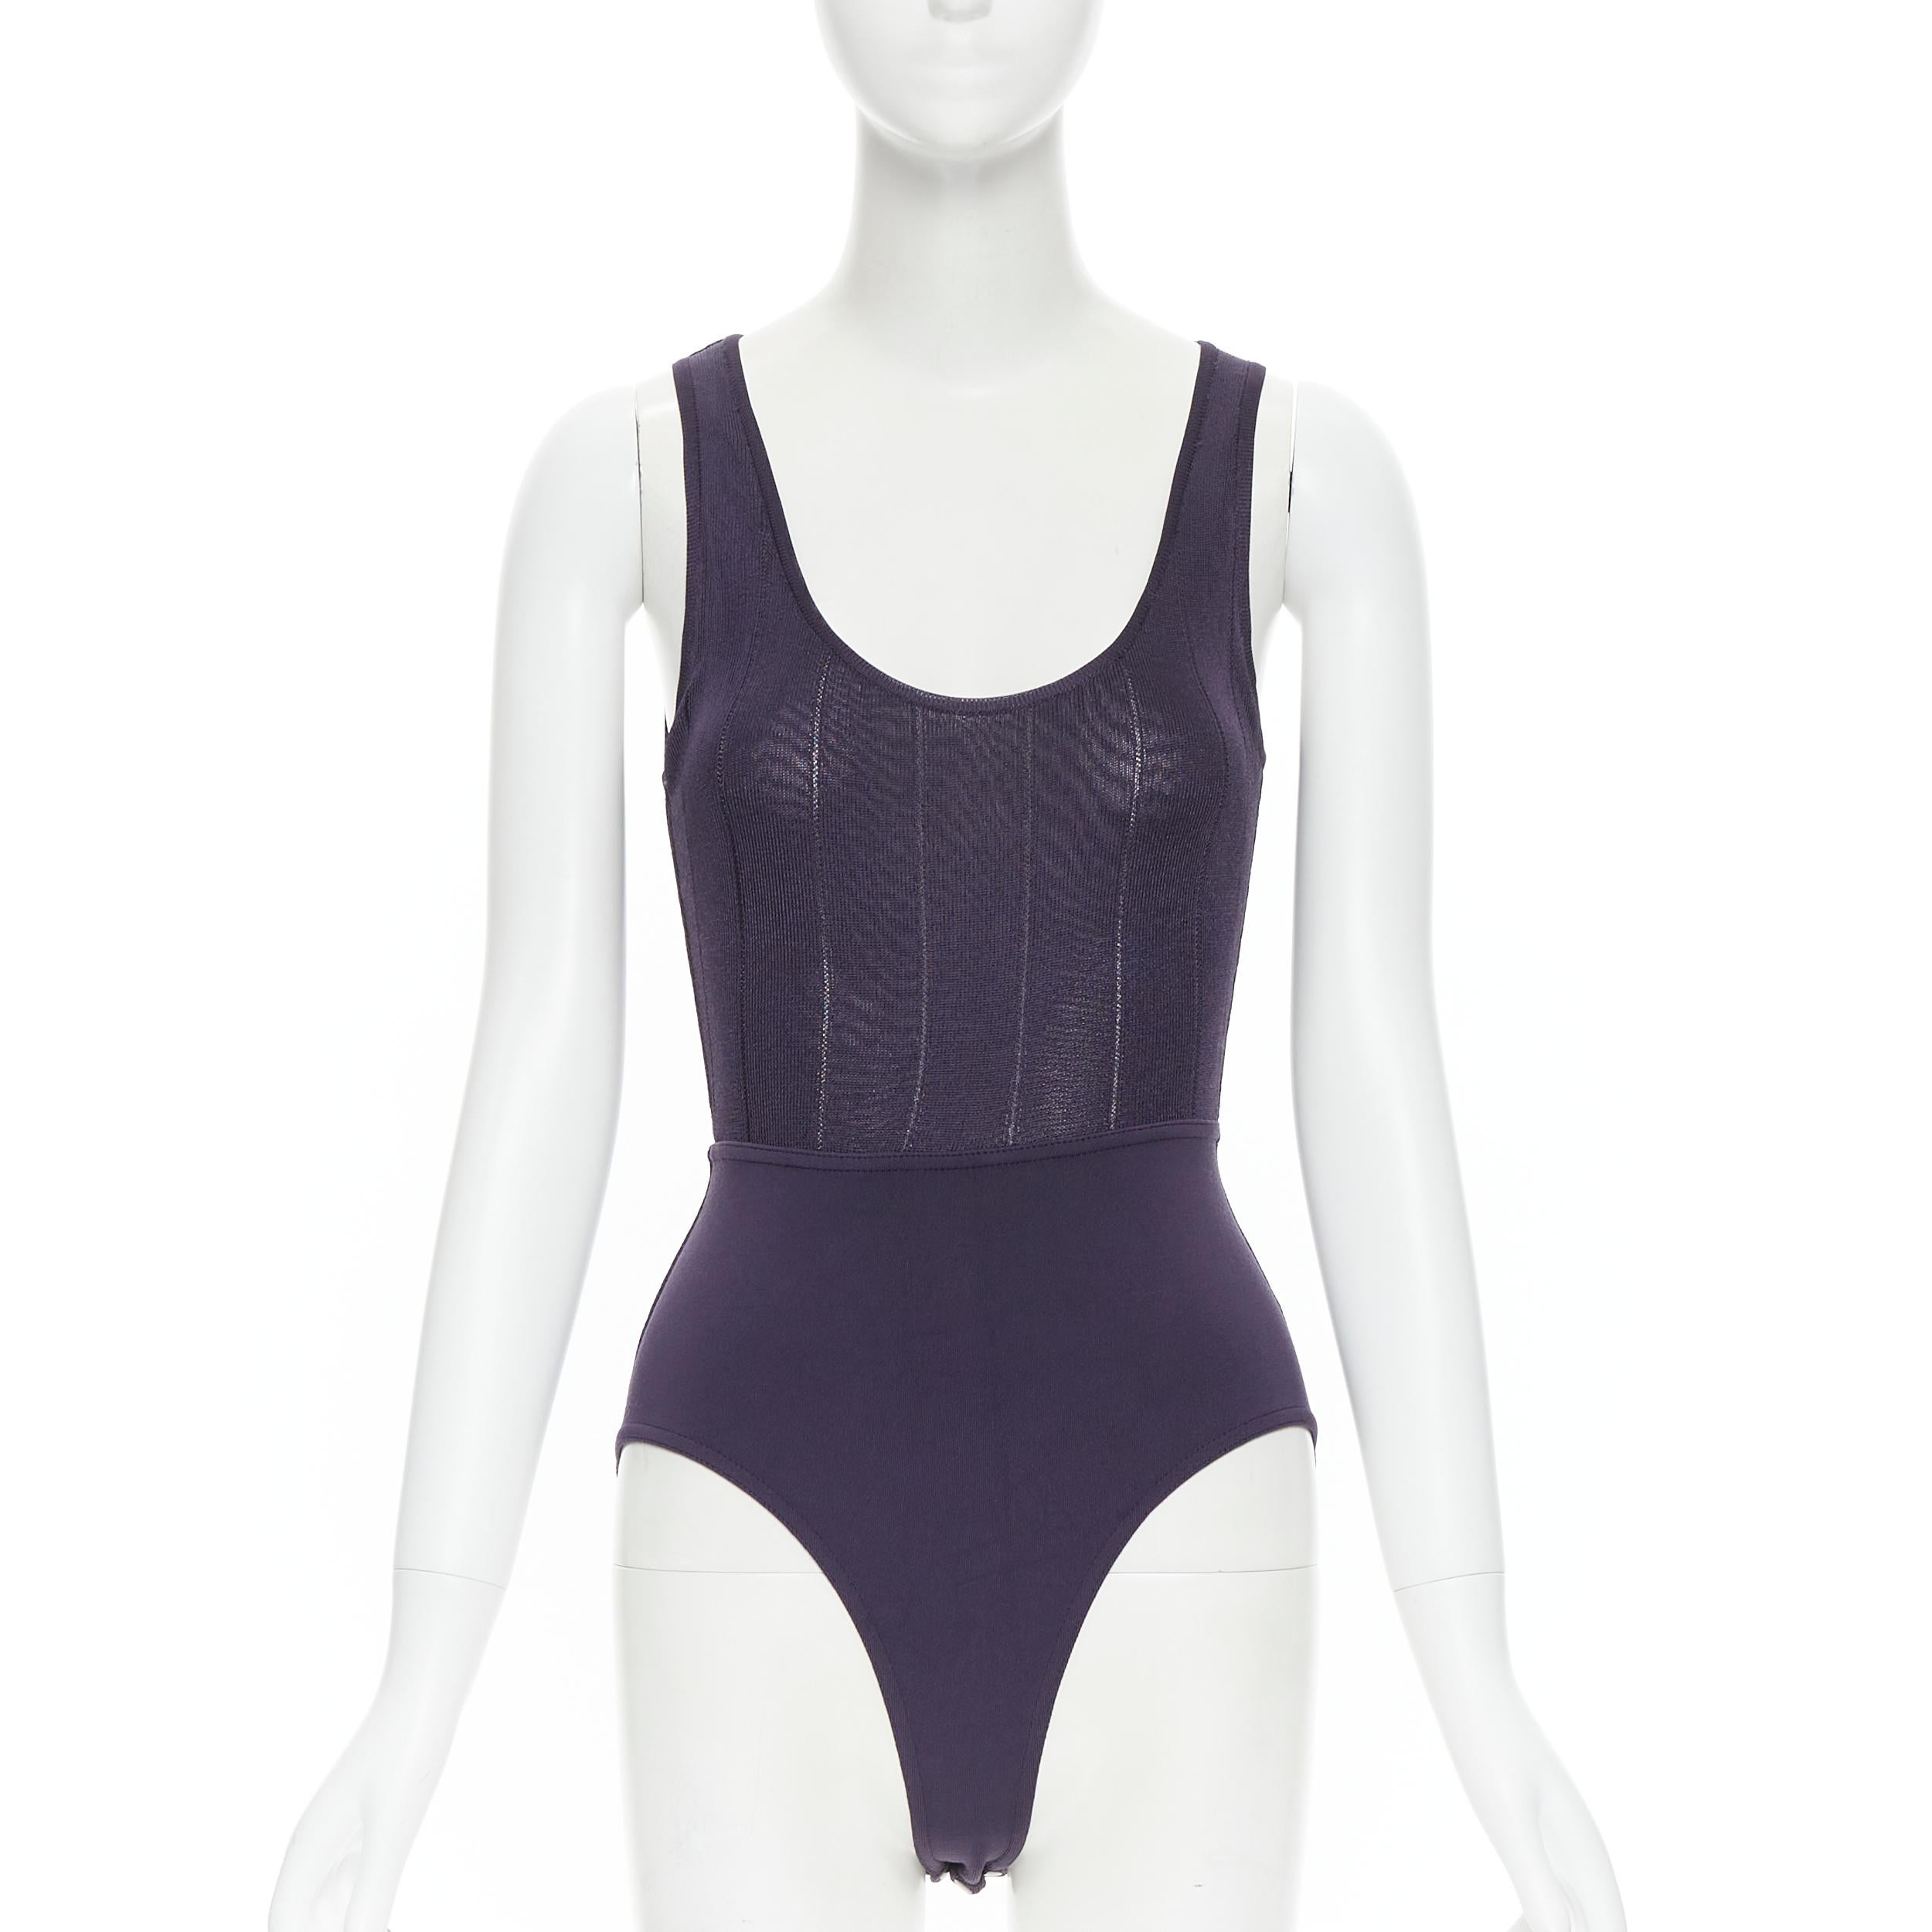 vintage ALAIA purple lattice seam bodysuit pleated flares skirt S 
Reference: GIYG/A00070 
Brand: Alaia 
Designer: Azzedine Alaia 
Material: Rayon 
Color: Purple 
Pattern: Solid 
Extra Detail: Scoop neck bodysuit. Flared skirt. 
Made in: Italy